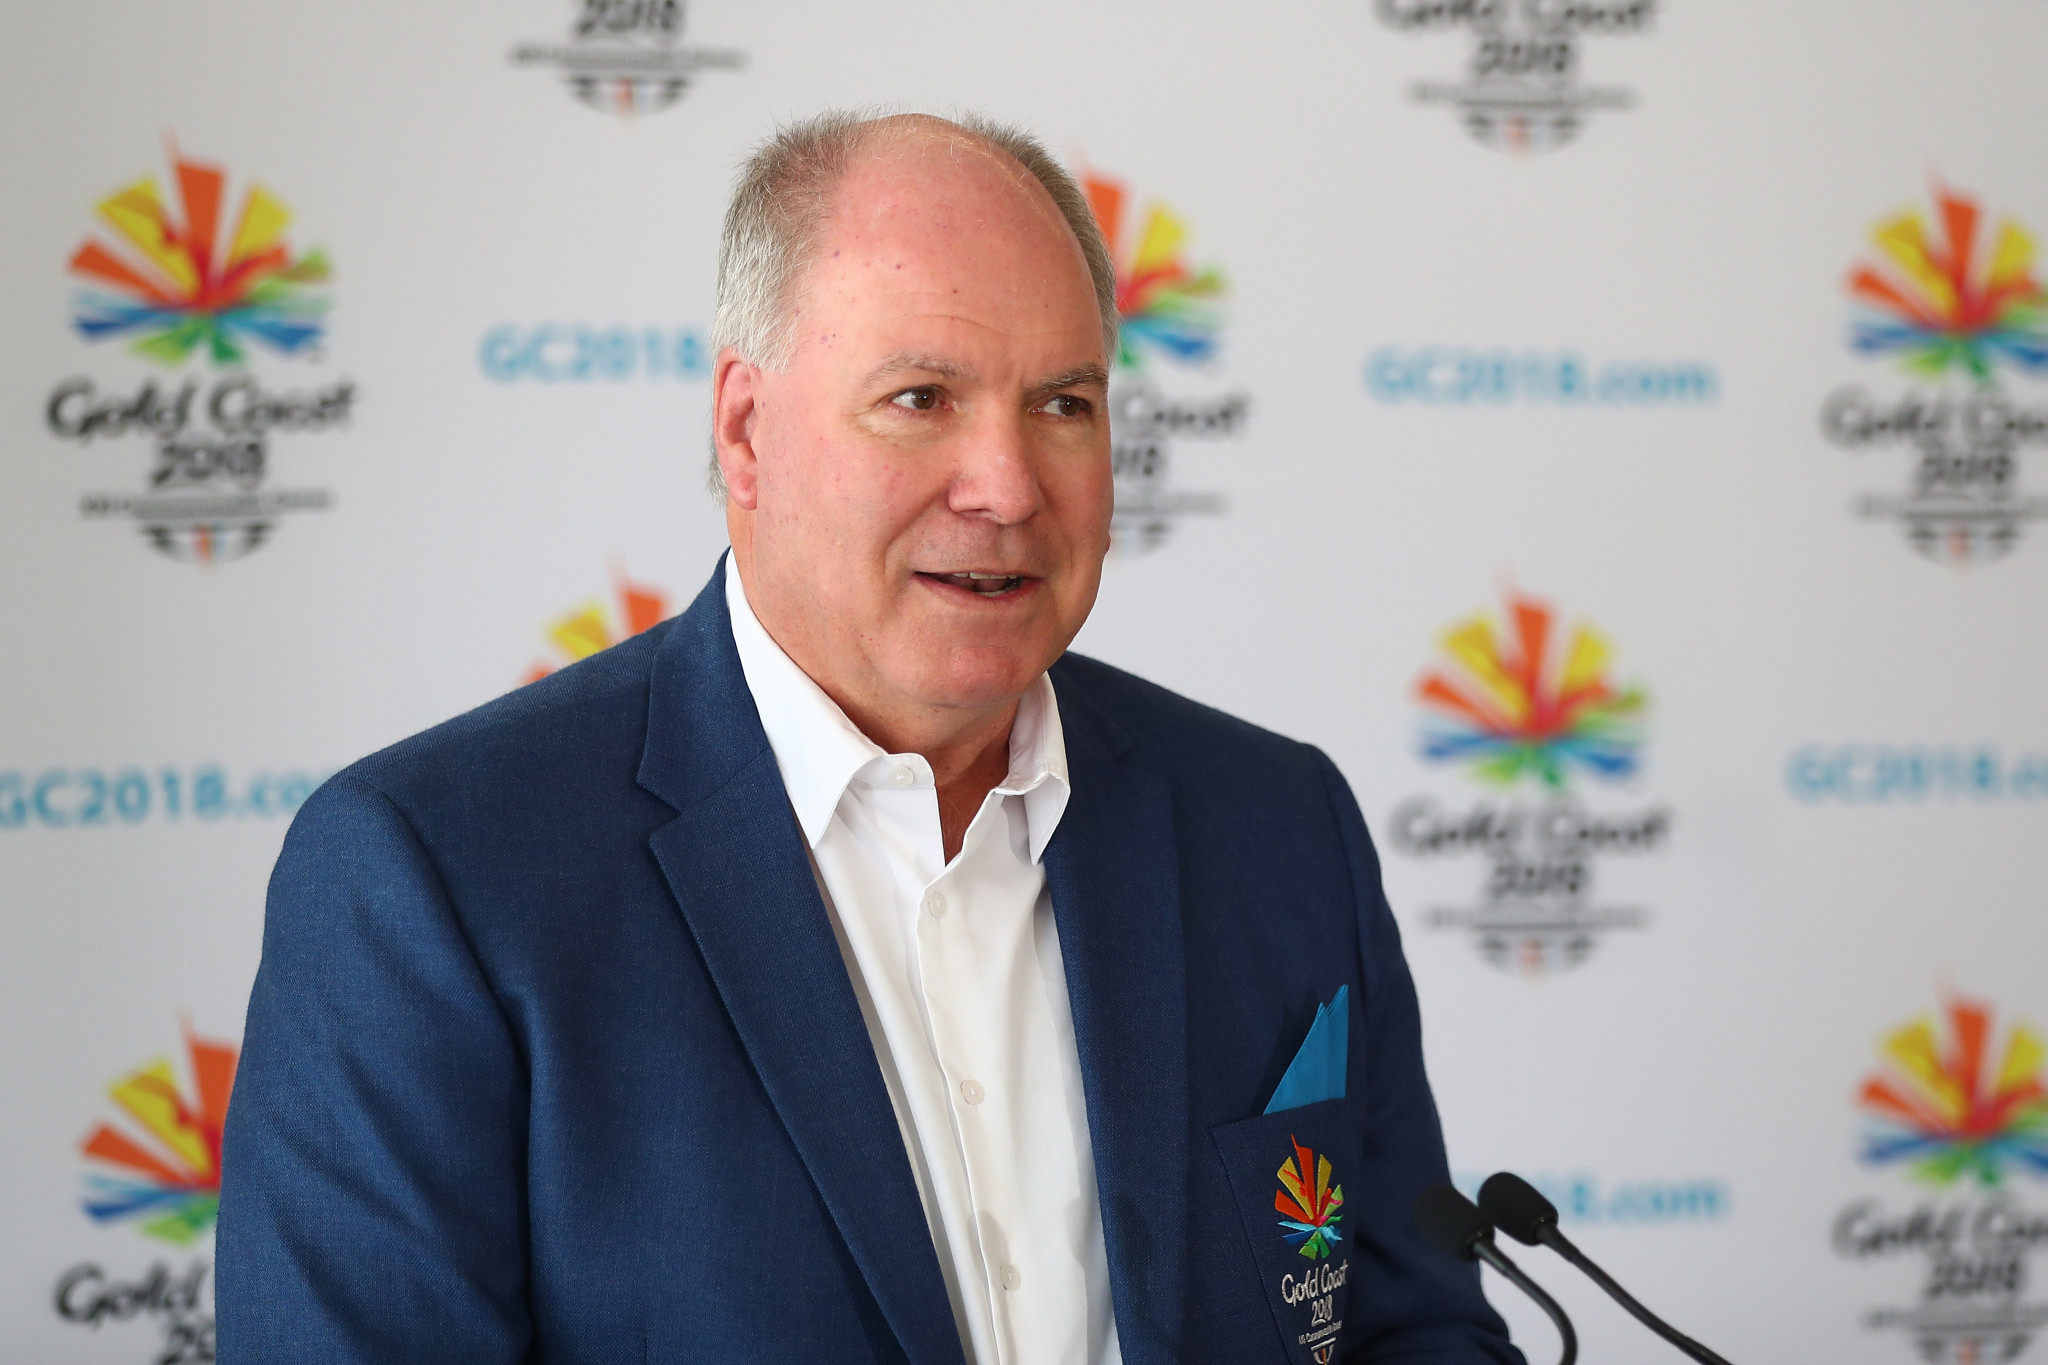 Gold Coast 2018 chief executive Mark Peters spoke positively about their preparations with 11 days to go ©Getty Images